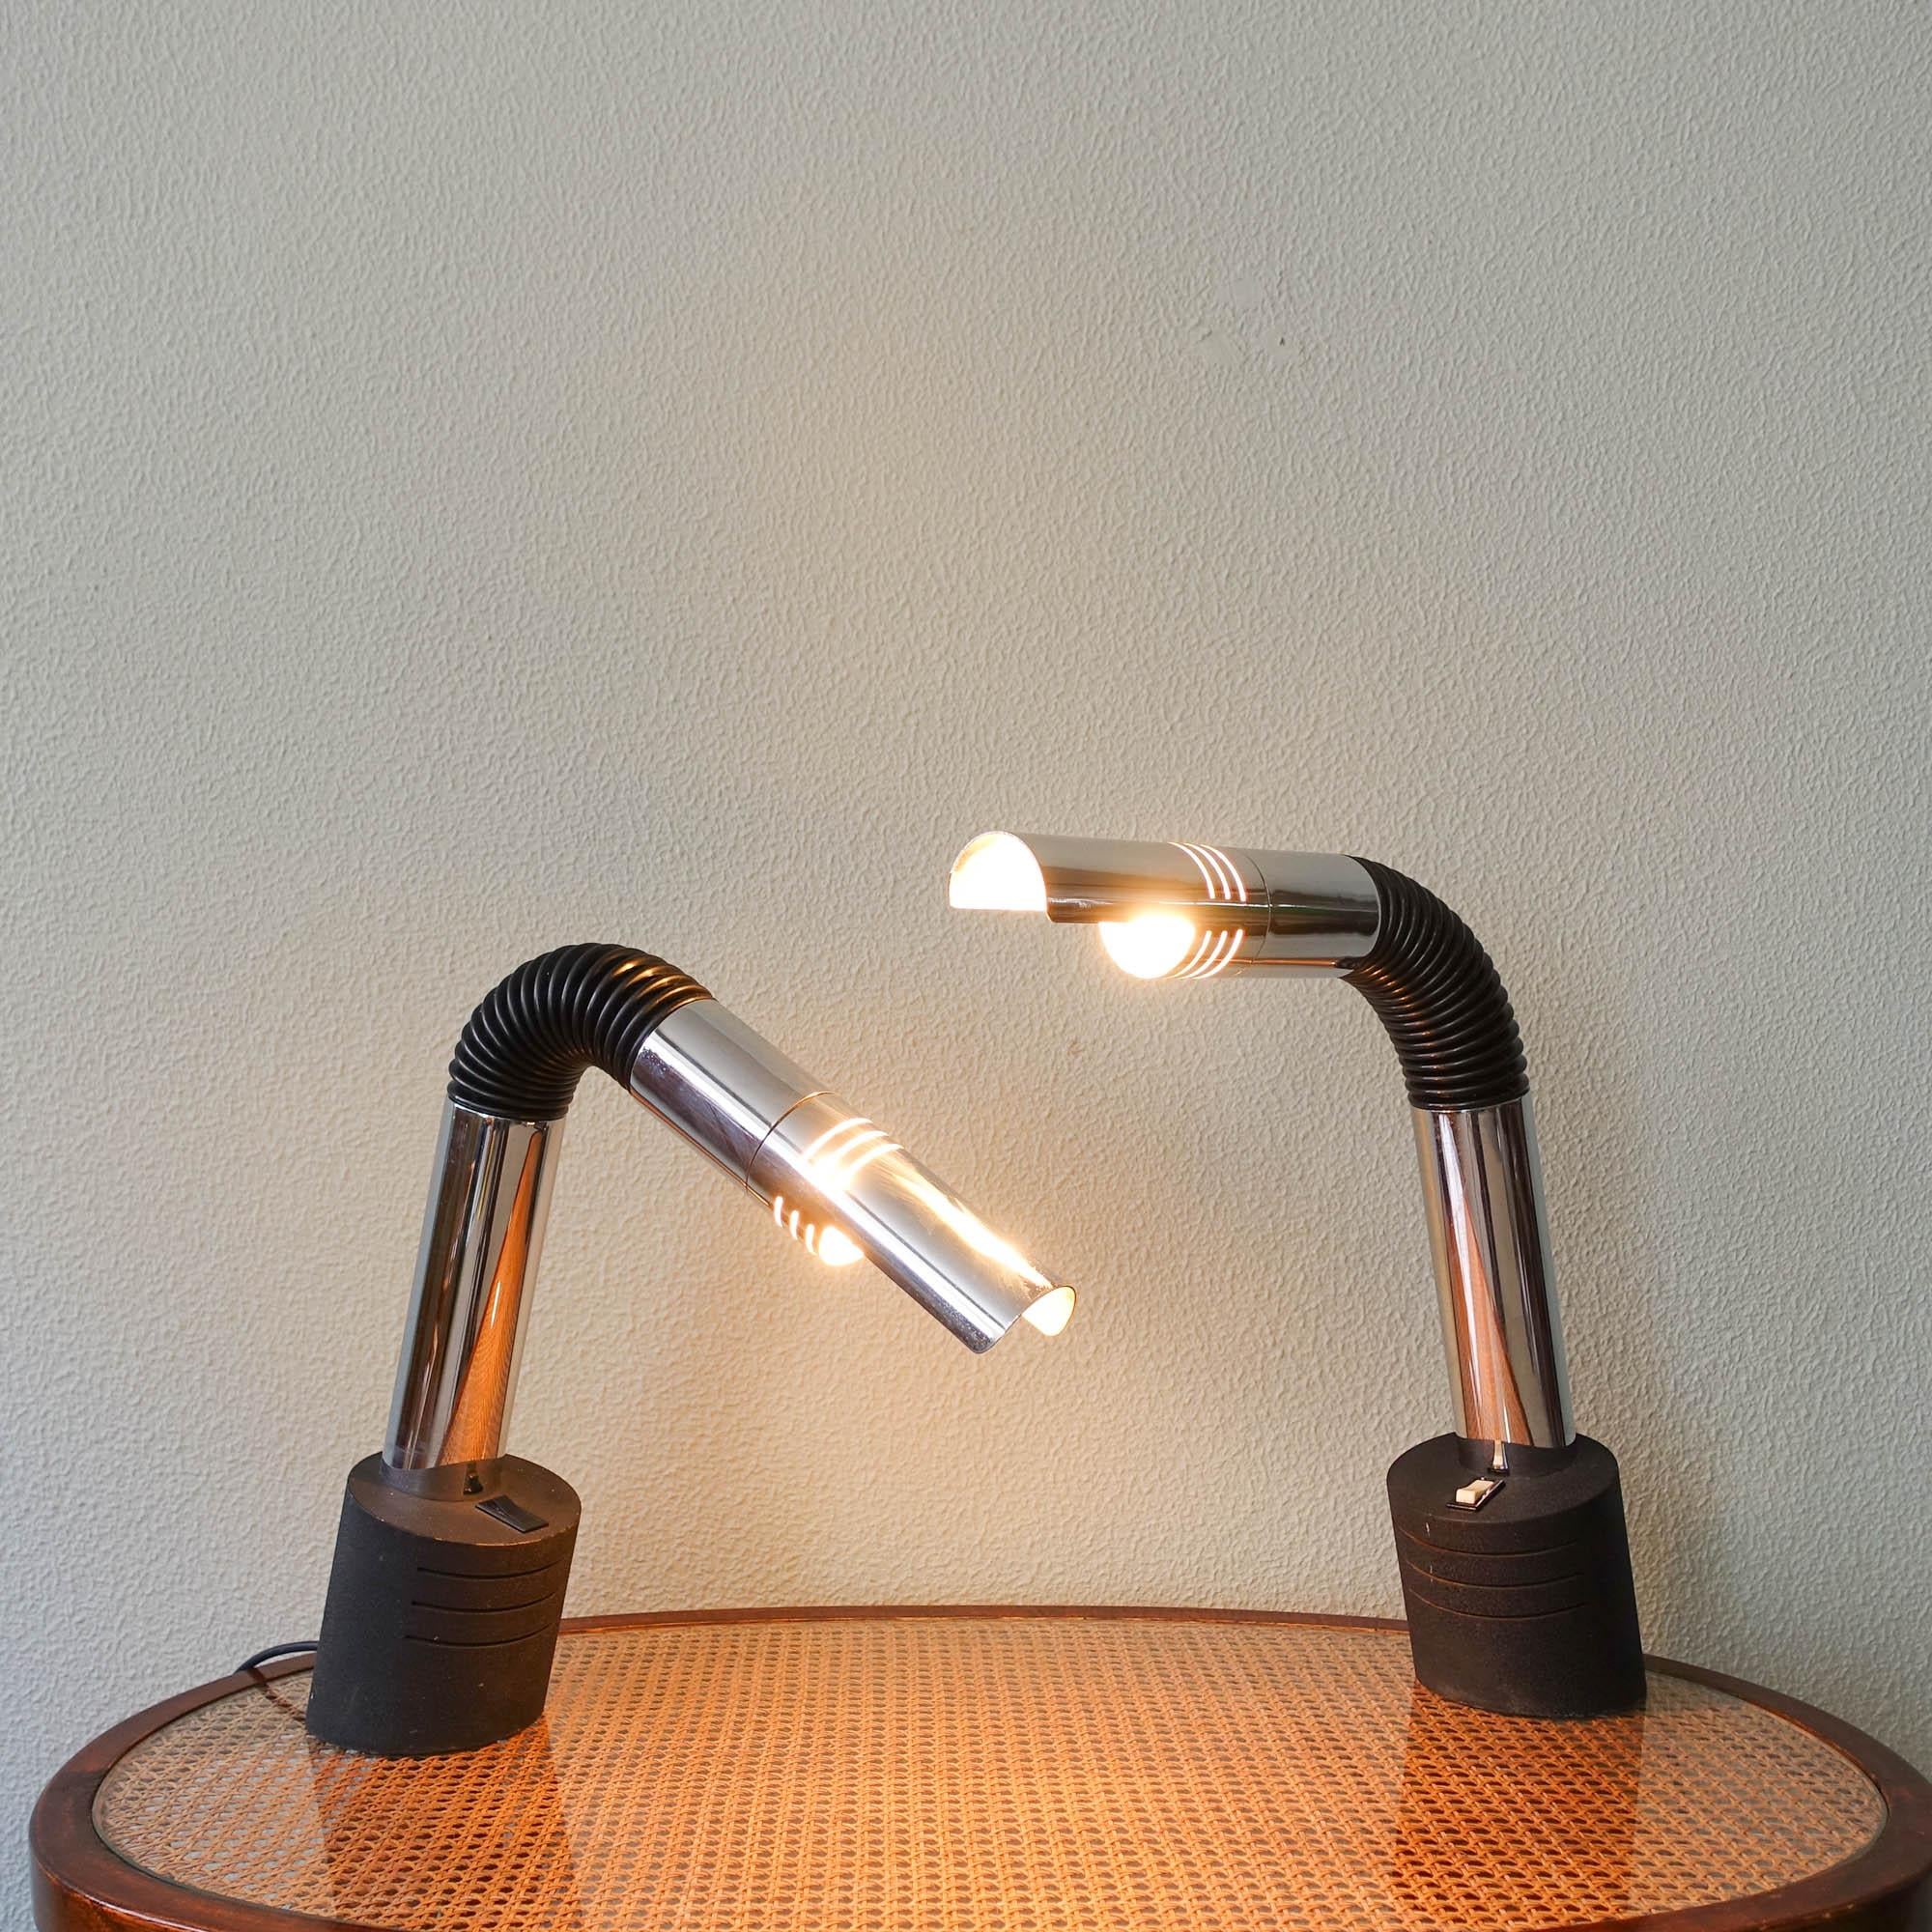 Italian Pair of “Elbow” Table Lamp by E. Bellini for Targetti Sankey, 1970s For Sale